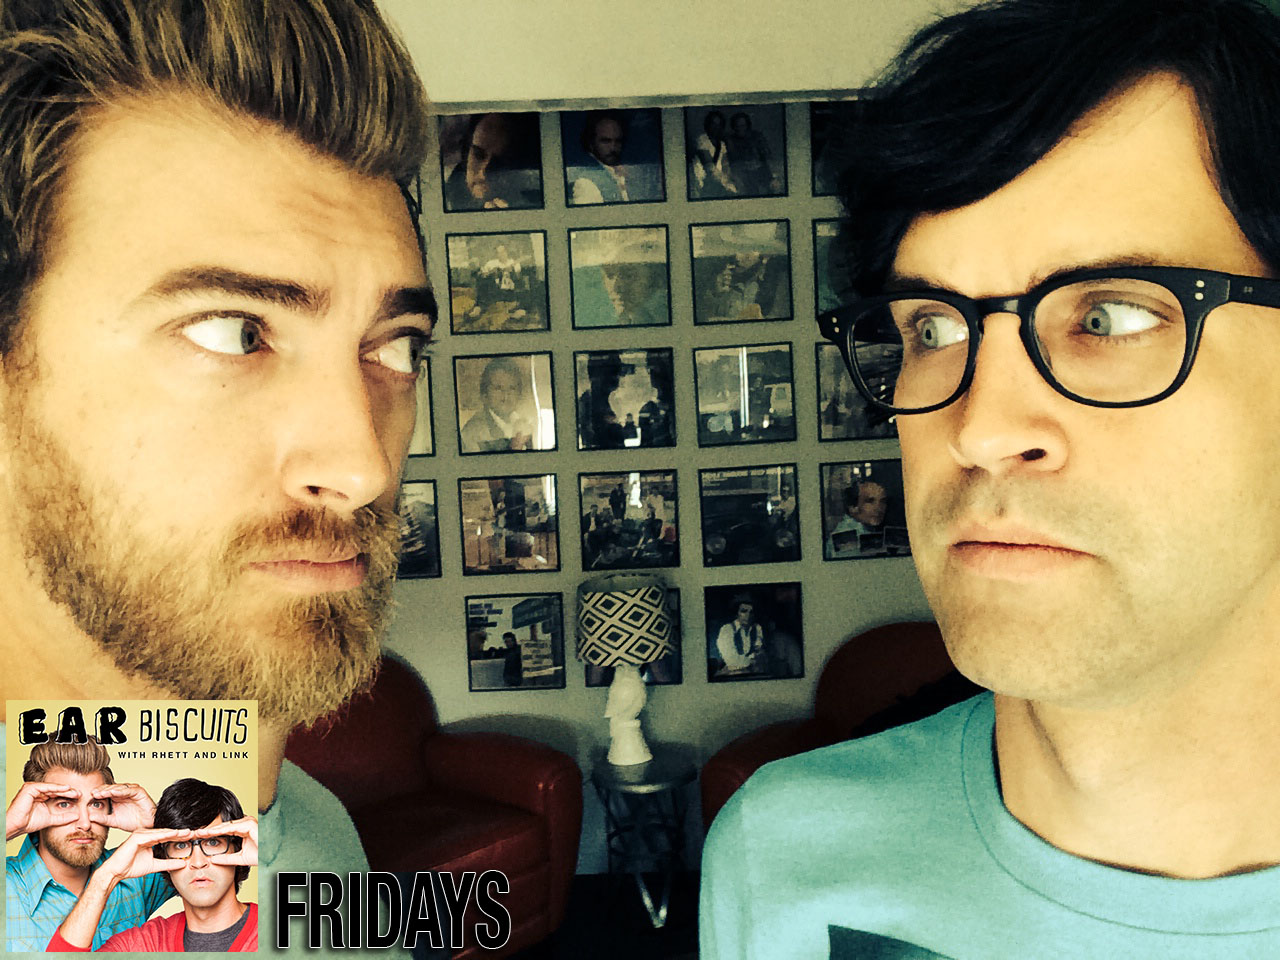 rhett and link it was about to get interesting